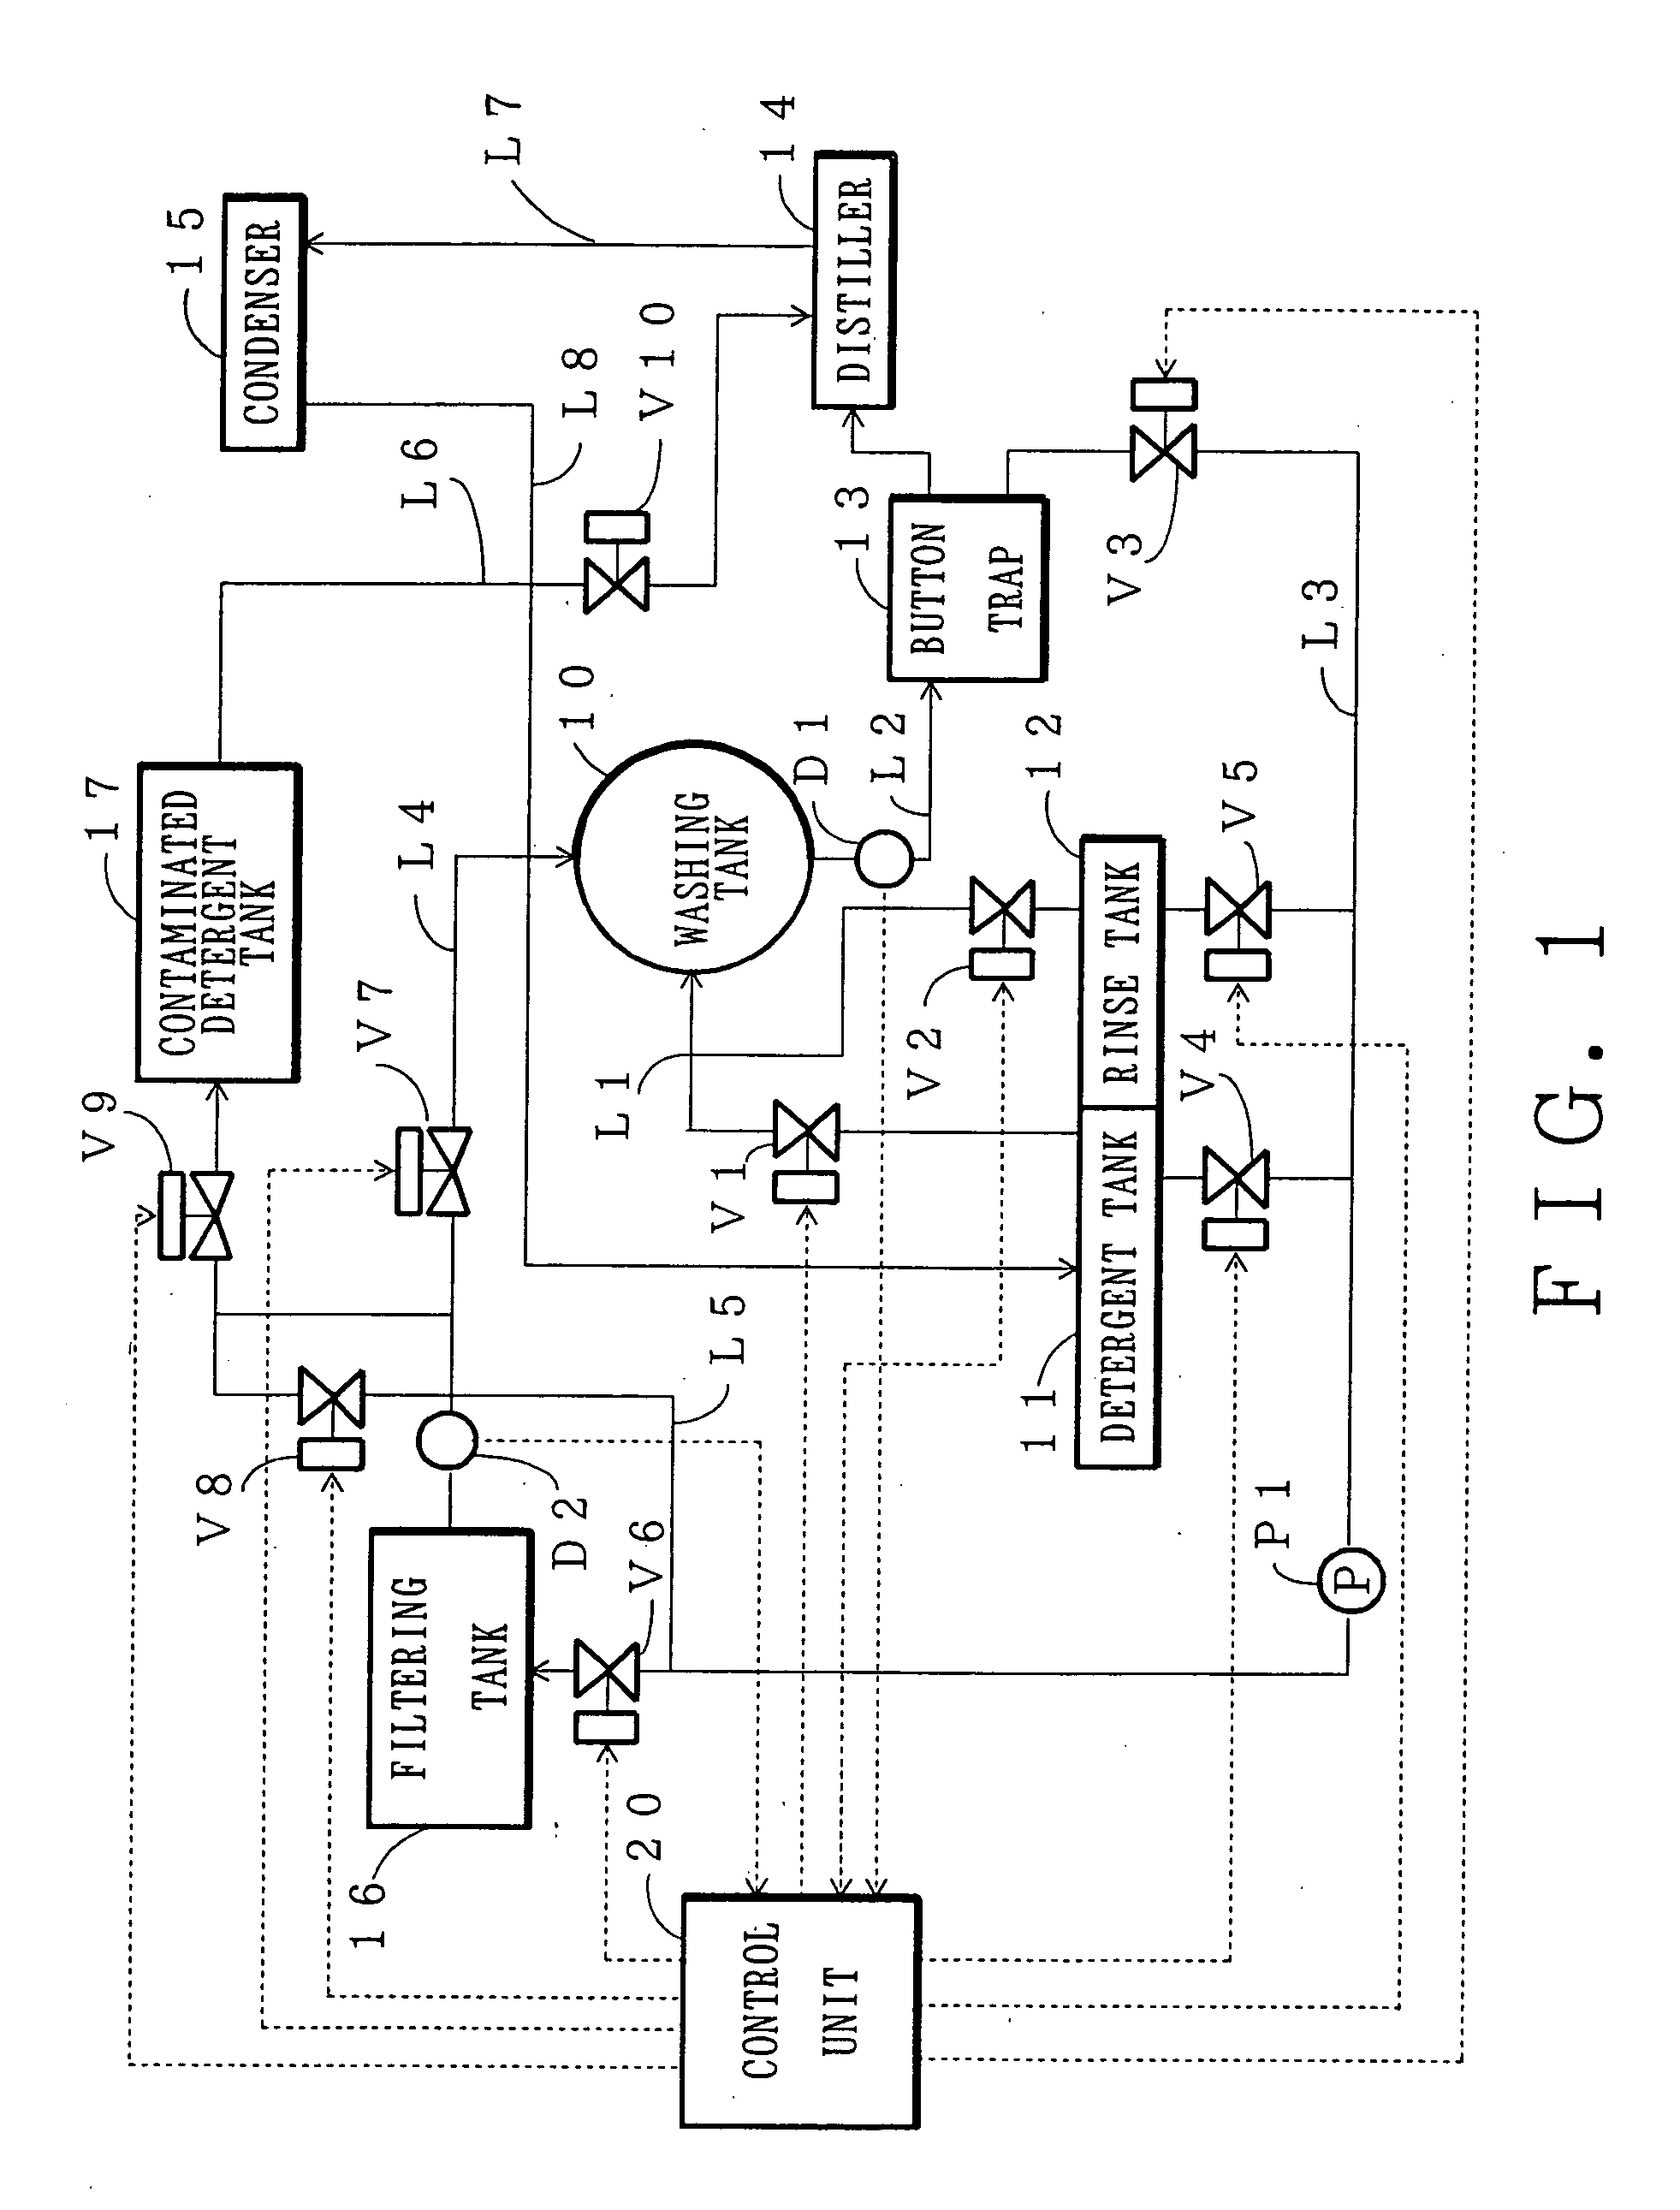 Dry cleaning machine and method of dry cleaning